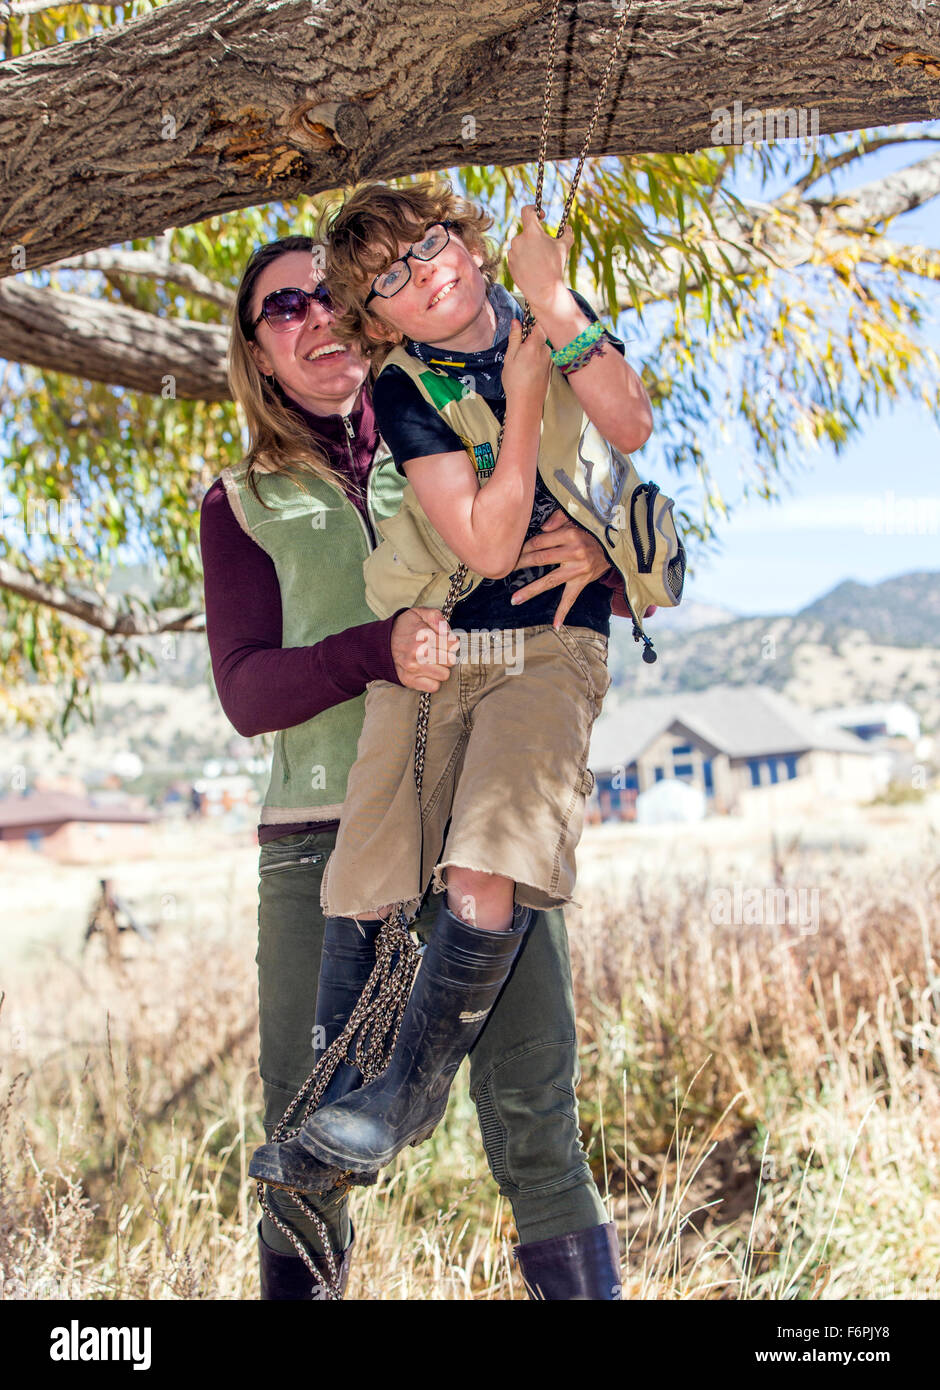 Attractive mother helps young son on rope swing hung from ranch tree Stock Photo